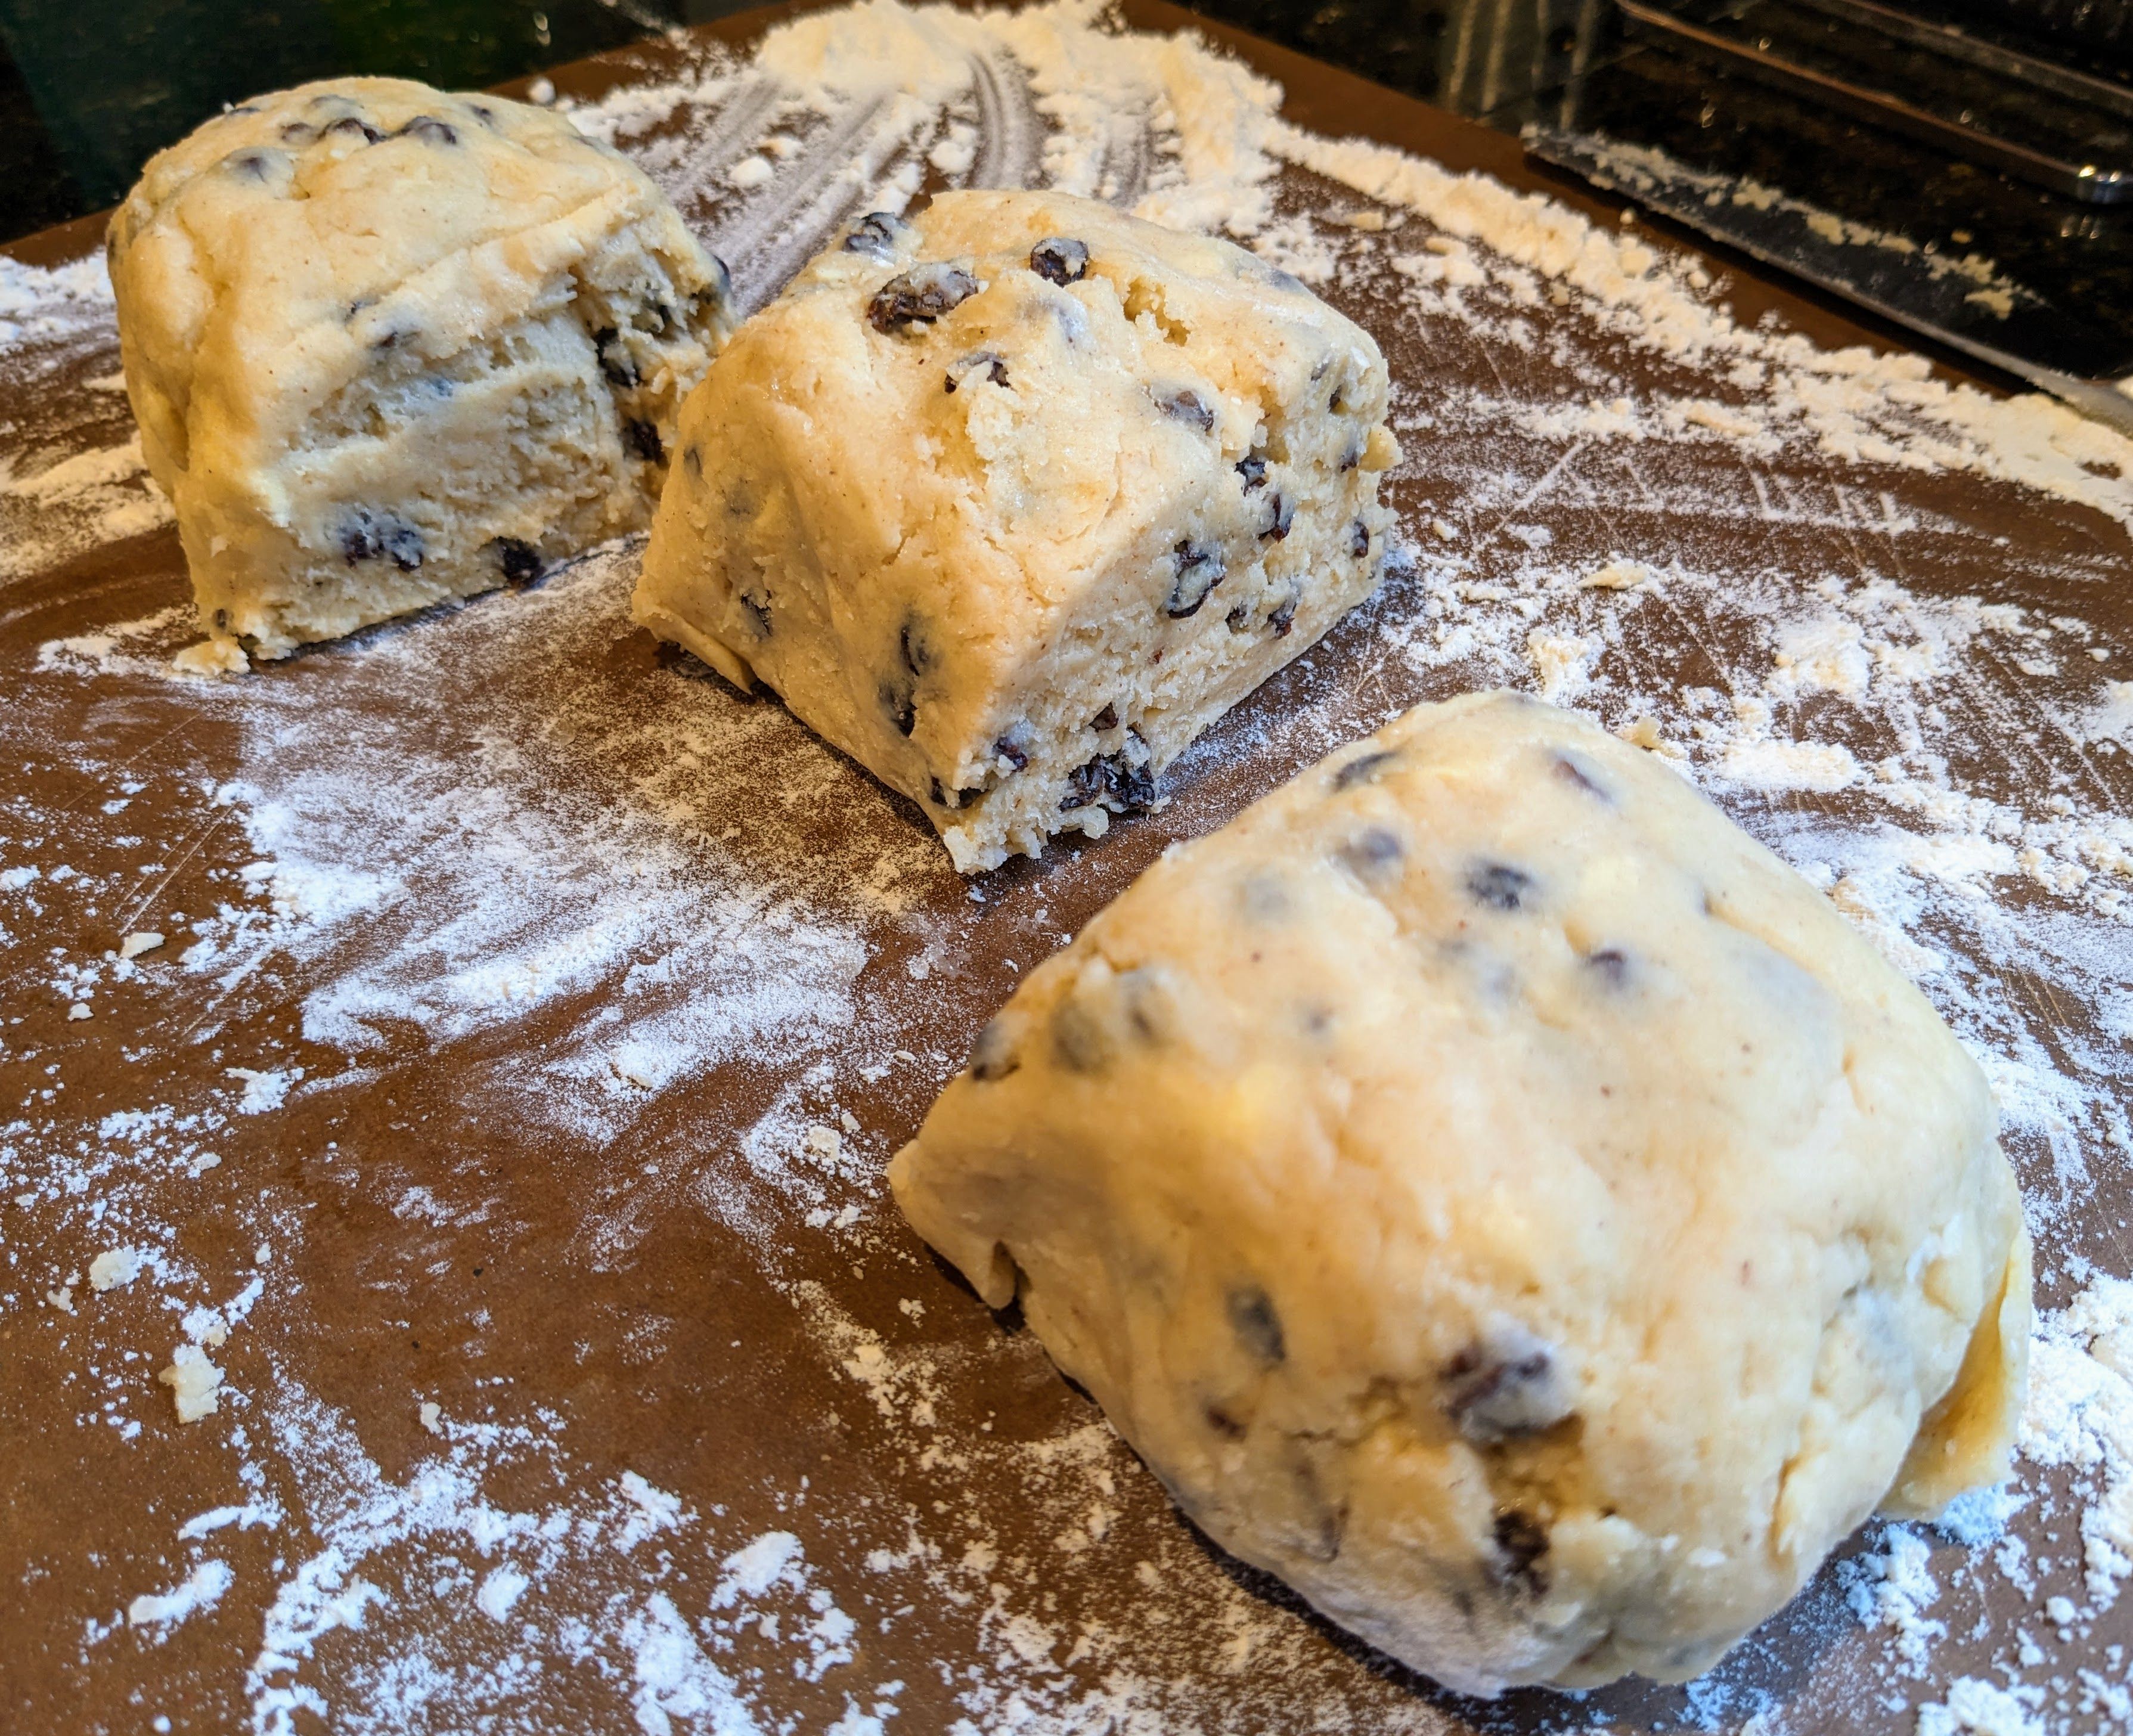 Welsh currant scone dough divided into thirds